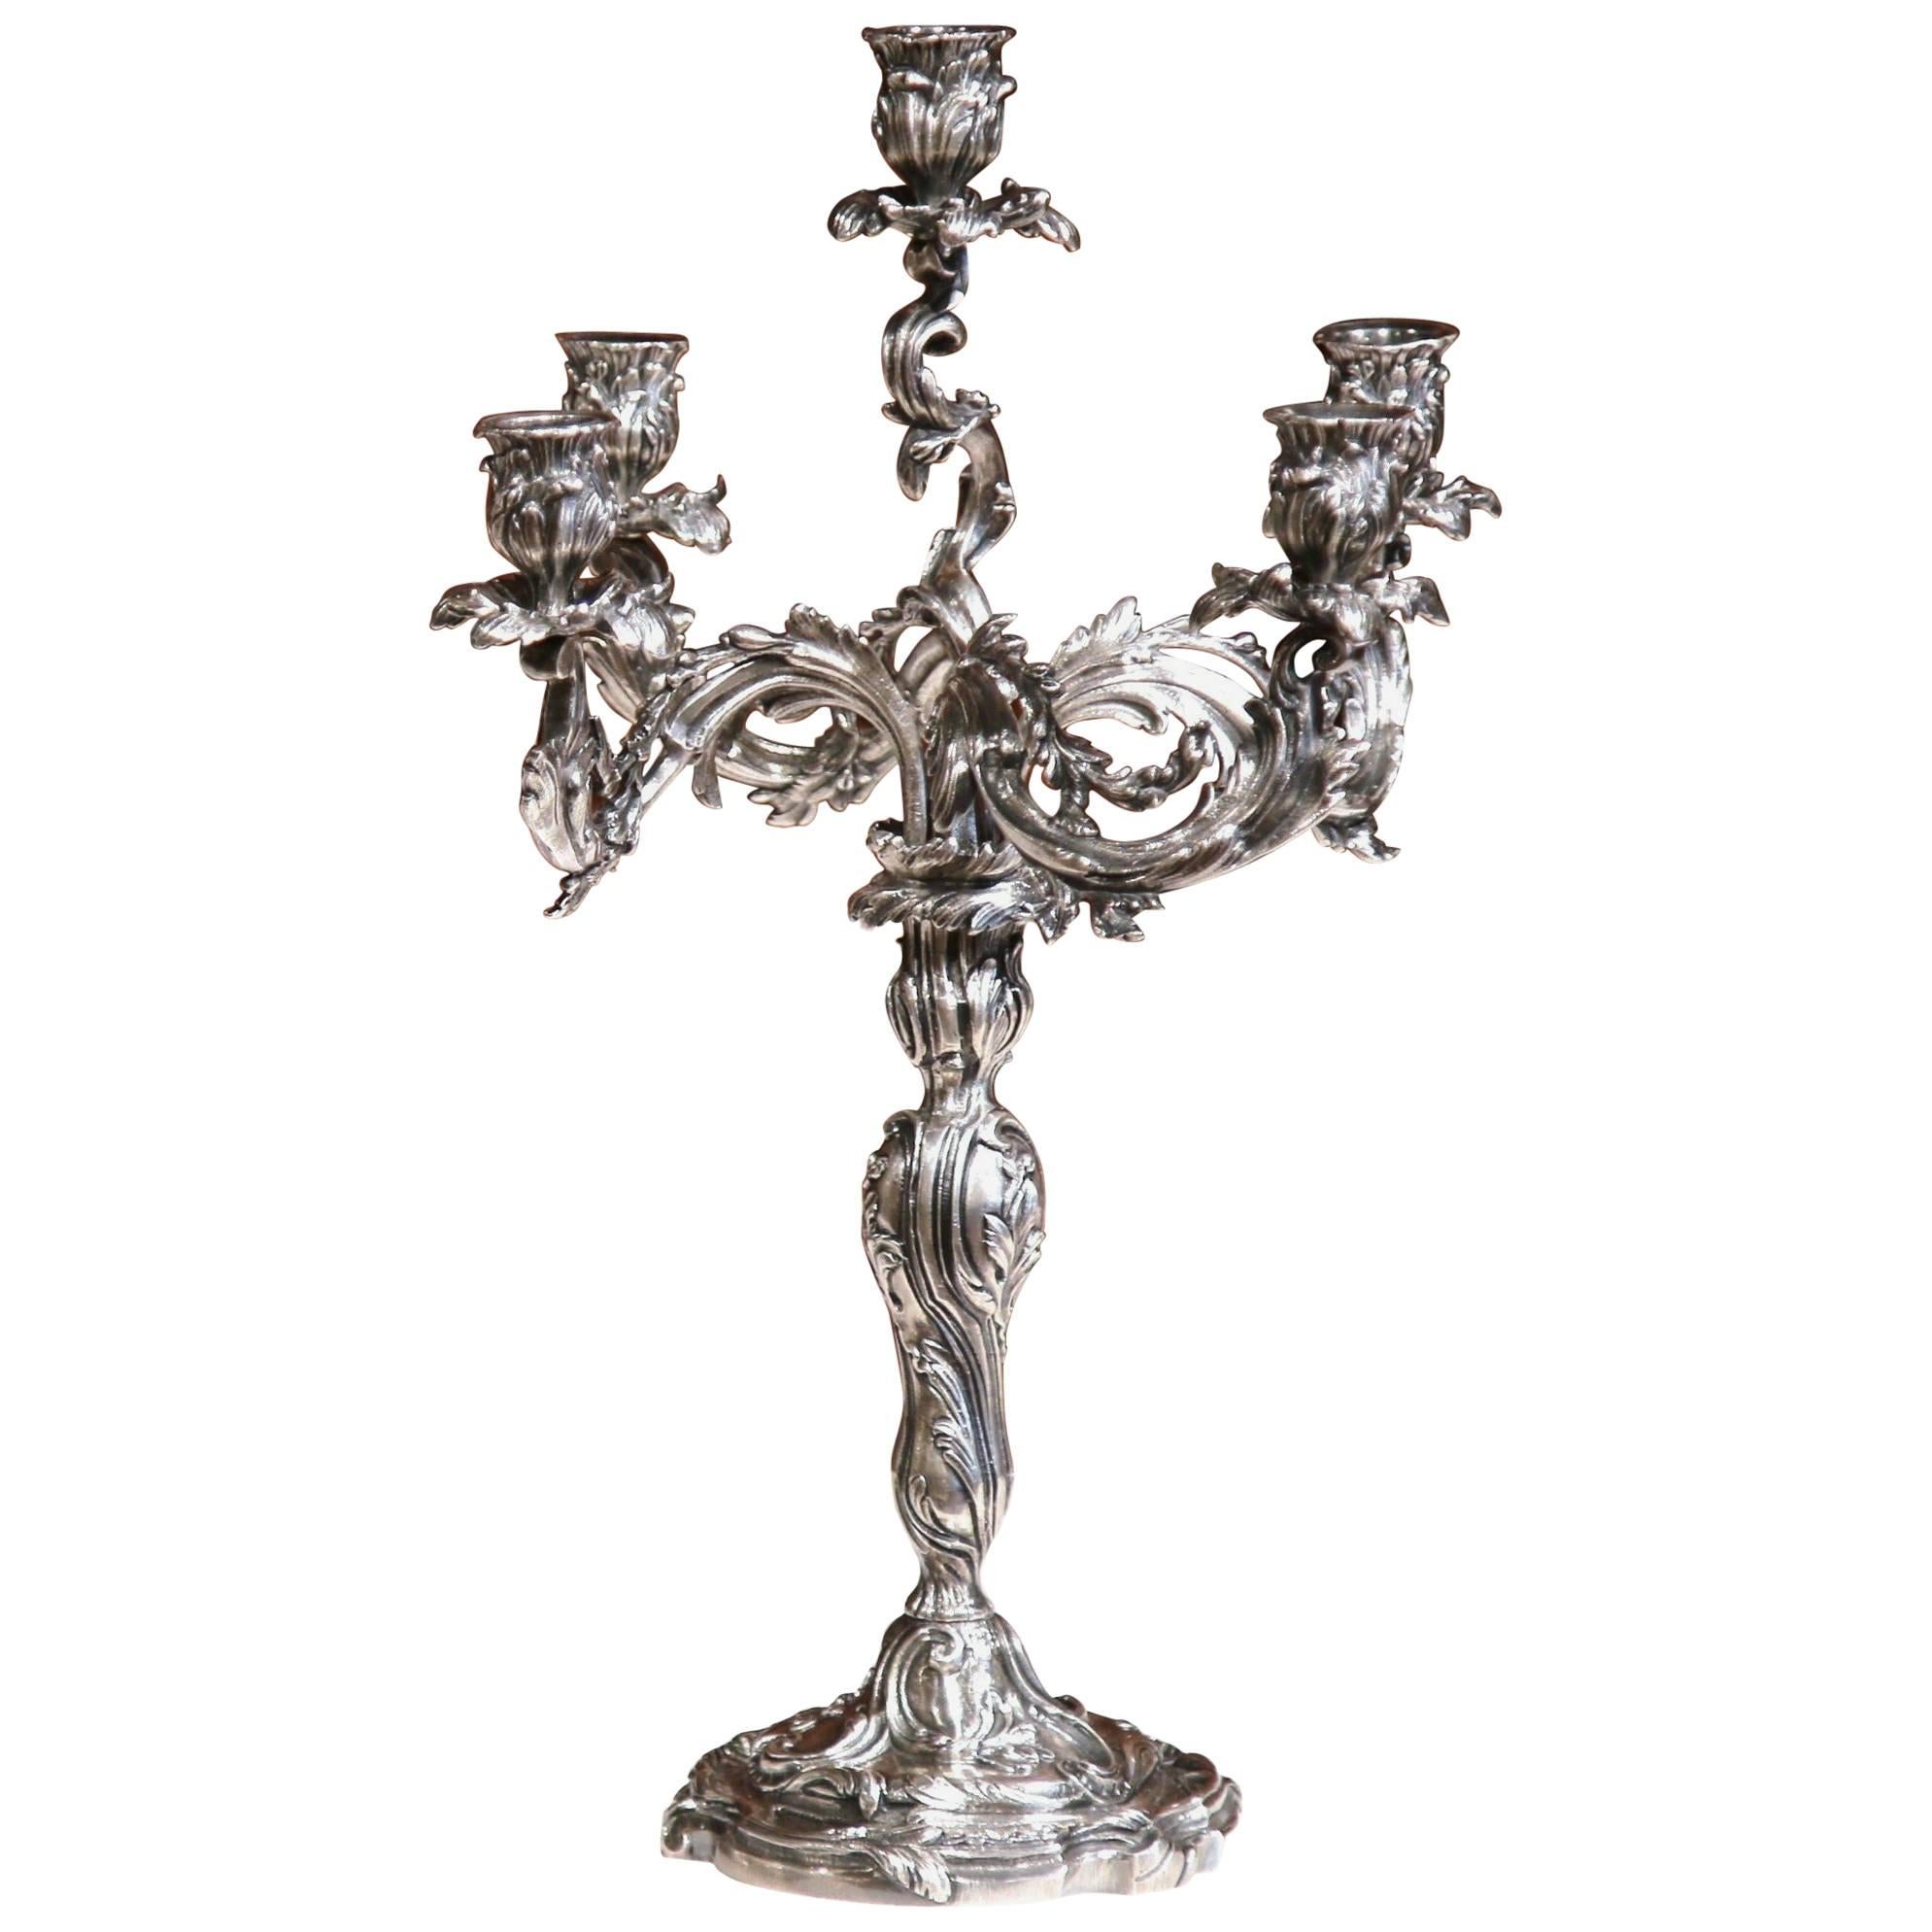 19th Century French Louis XV Bronze Silvered Five-Arm Candelabra